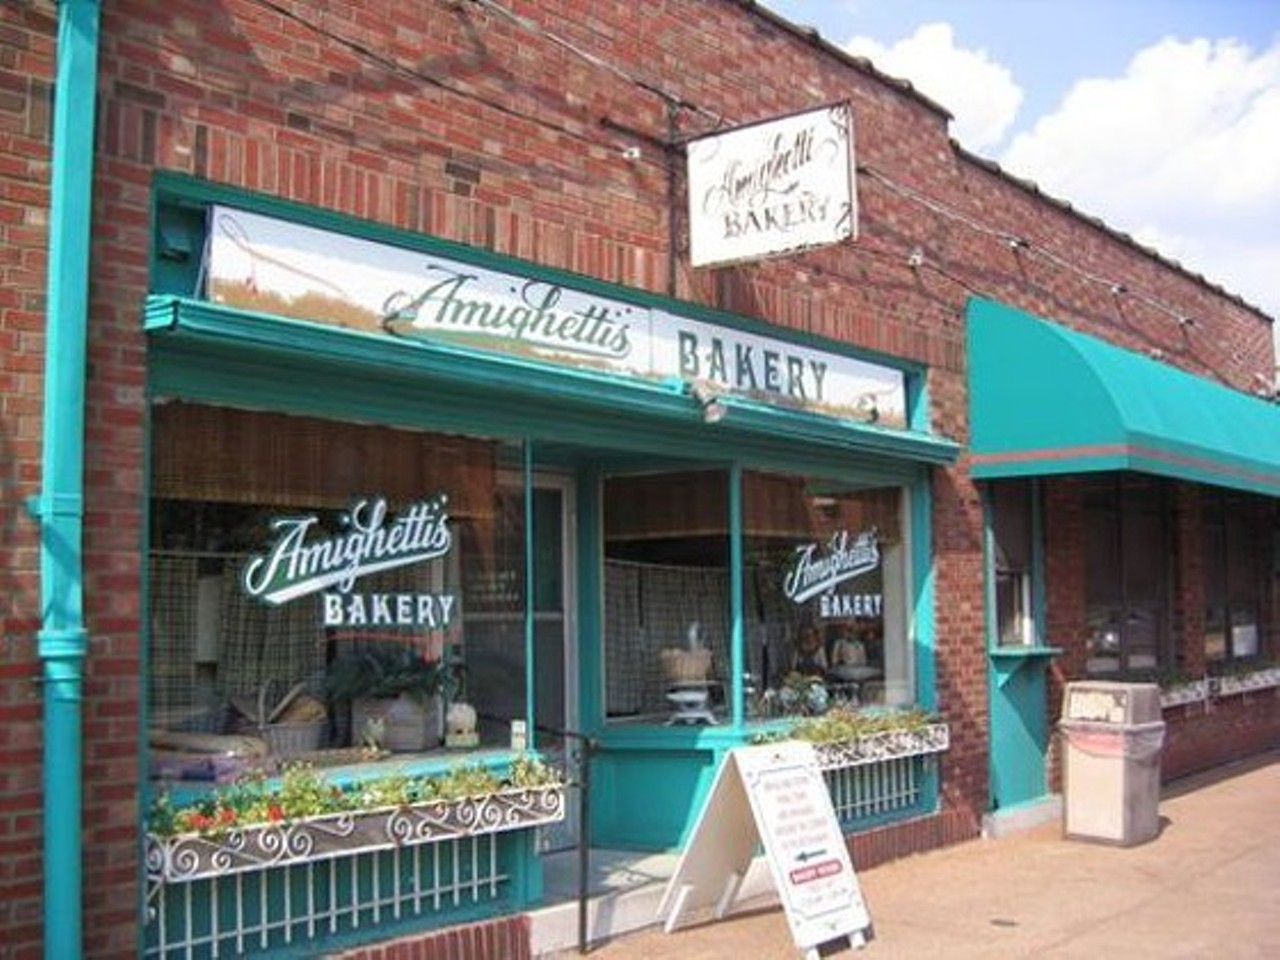 Amaghetti's Bakery and Cafe
Locations on The Hill, in Hazelwood and in Webster Groves.
Here you can get half a giant sub for the not-so-giant price of $4.95. RFT File Photo.